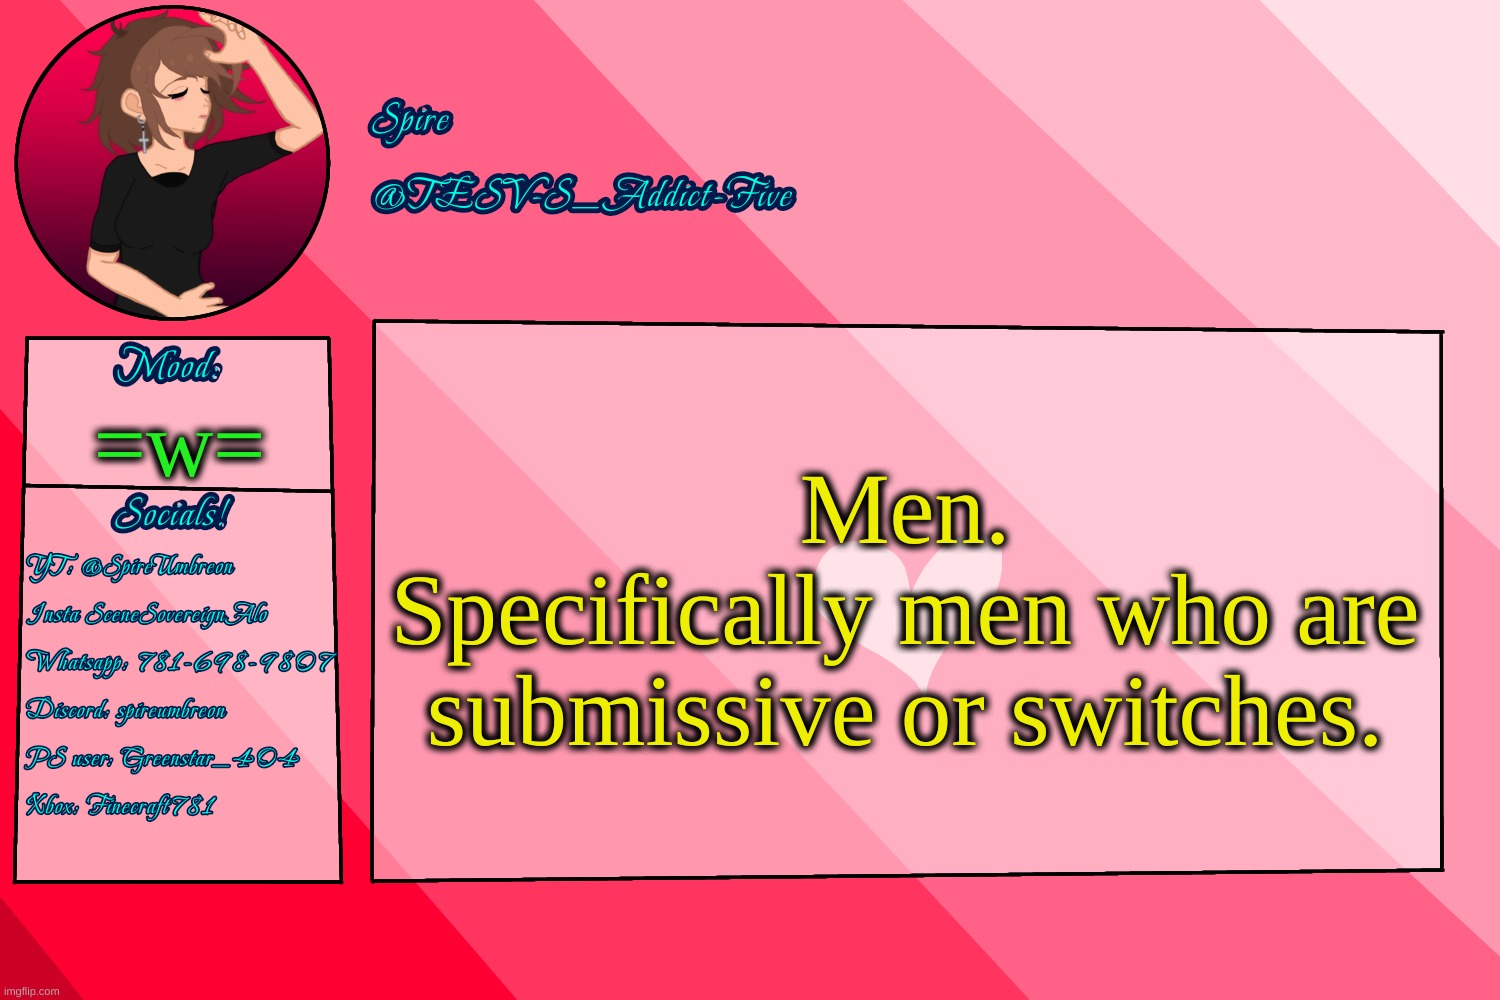 . | Men.
Specifically men who are submissive or switches. =w= | image tagged in tesv-s_addict-five announcement template | made w/ Imgflip meme maker